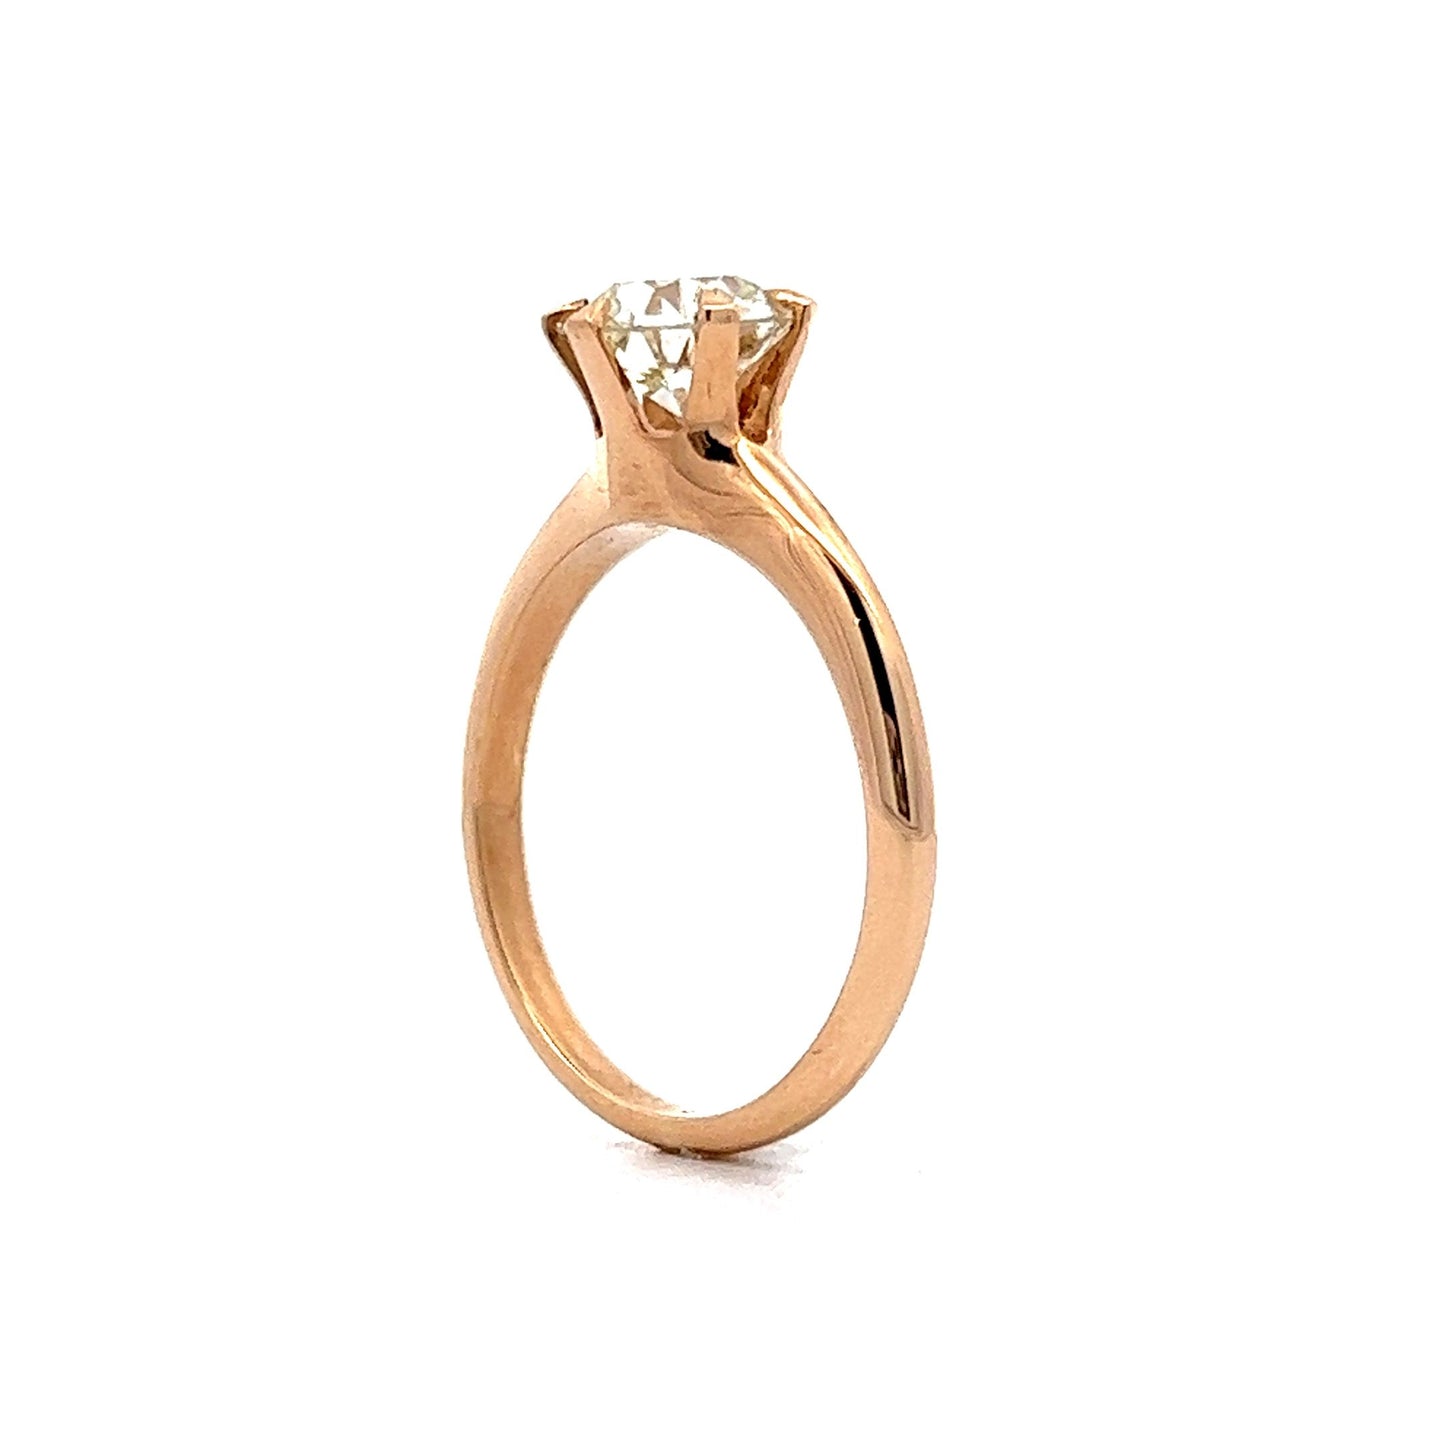 Victorian Solitaire Diamond Engagement Ring in 14k Rose Gold